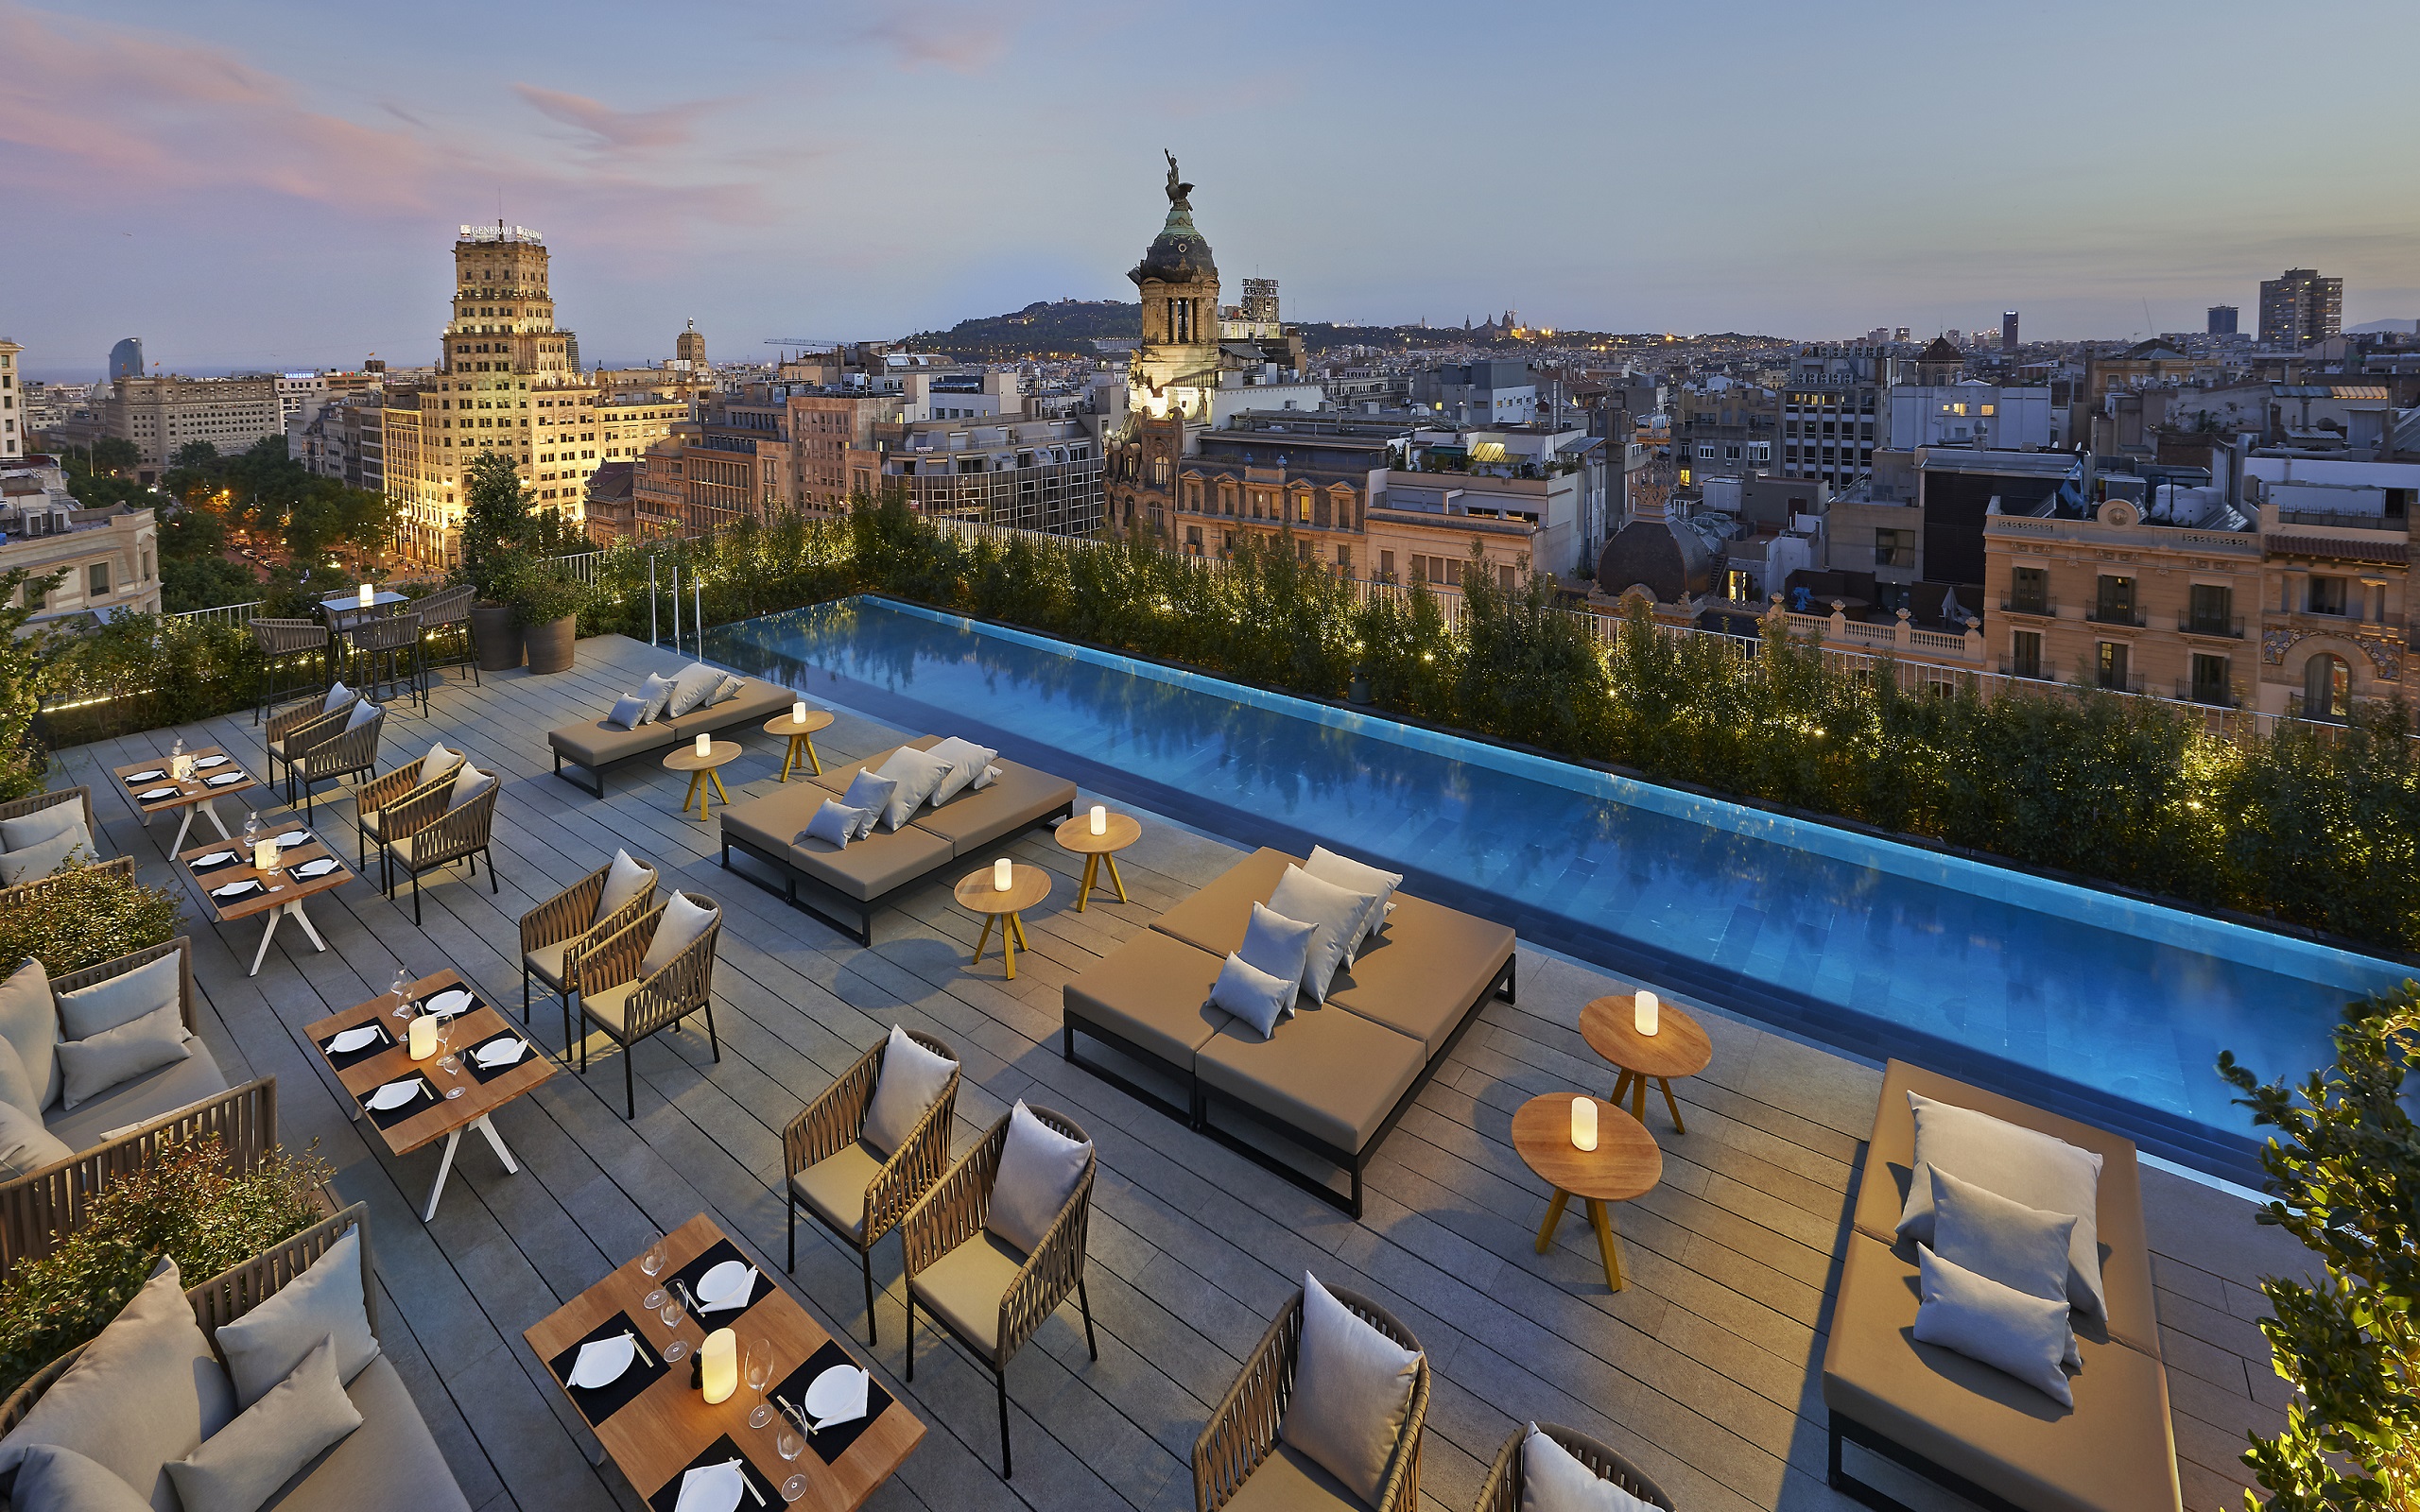 The Mandarin Oriental Hotel Boasts a Spectacular 360-Degree View of the Great City from its Terrace Rooftop